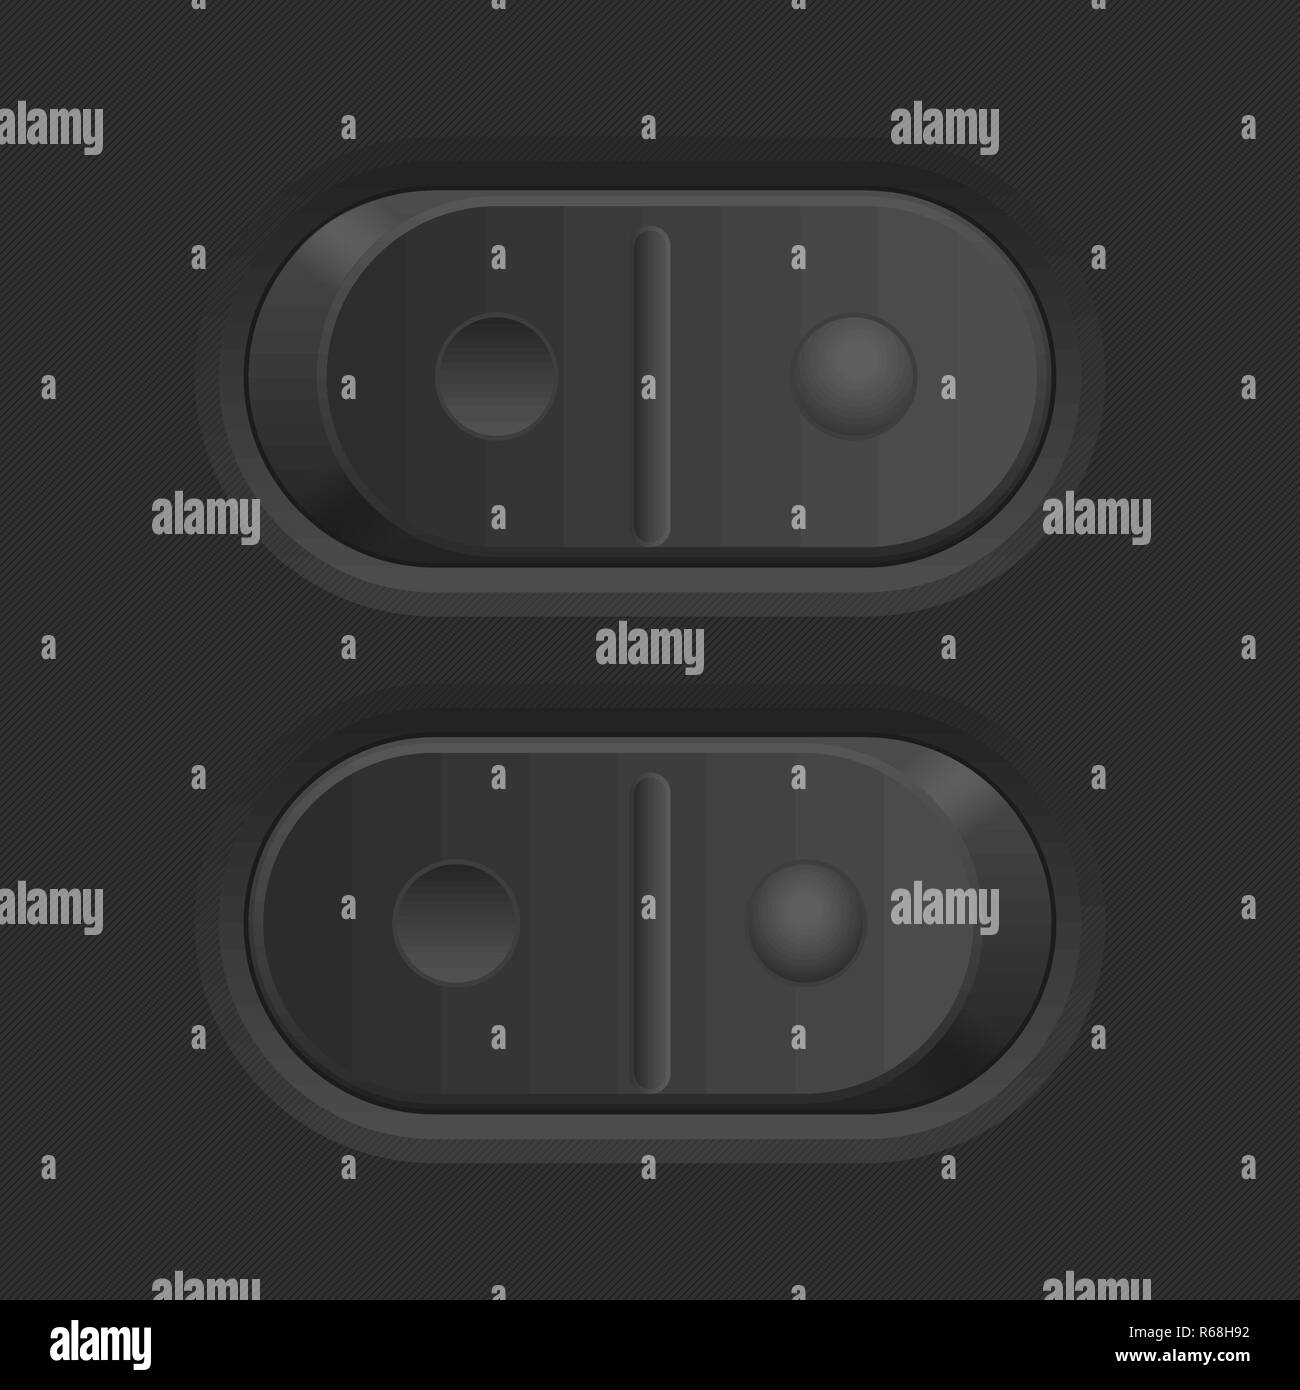 Black switch 3d push buttons Stock Vector